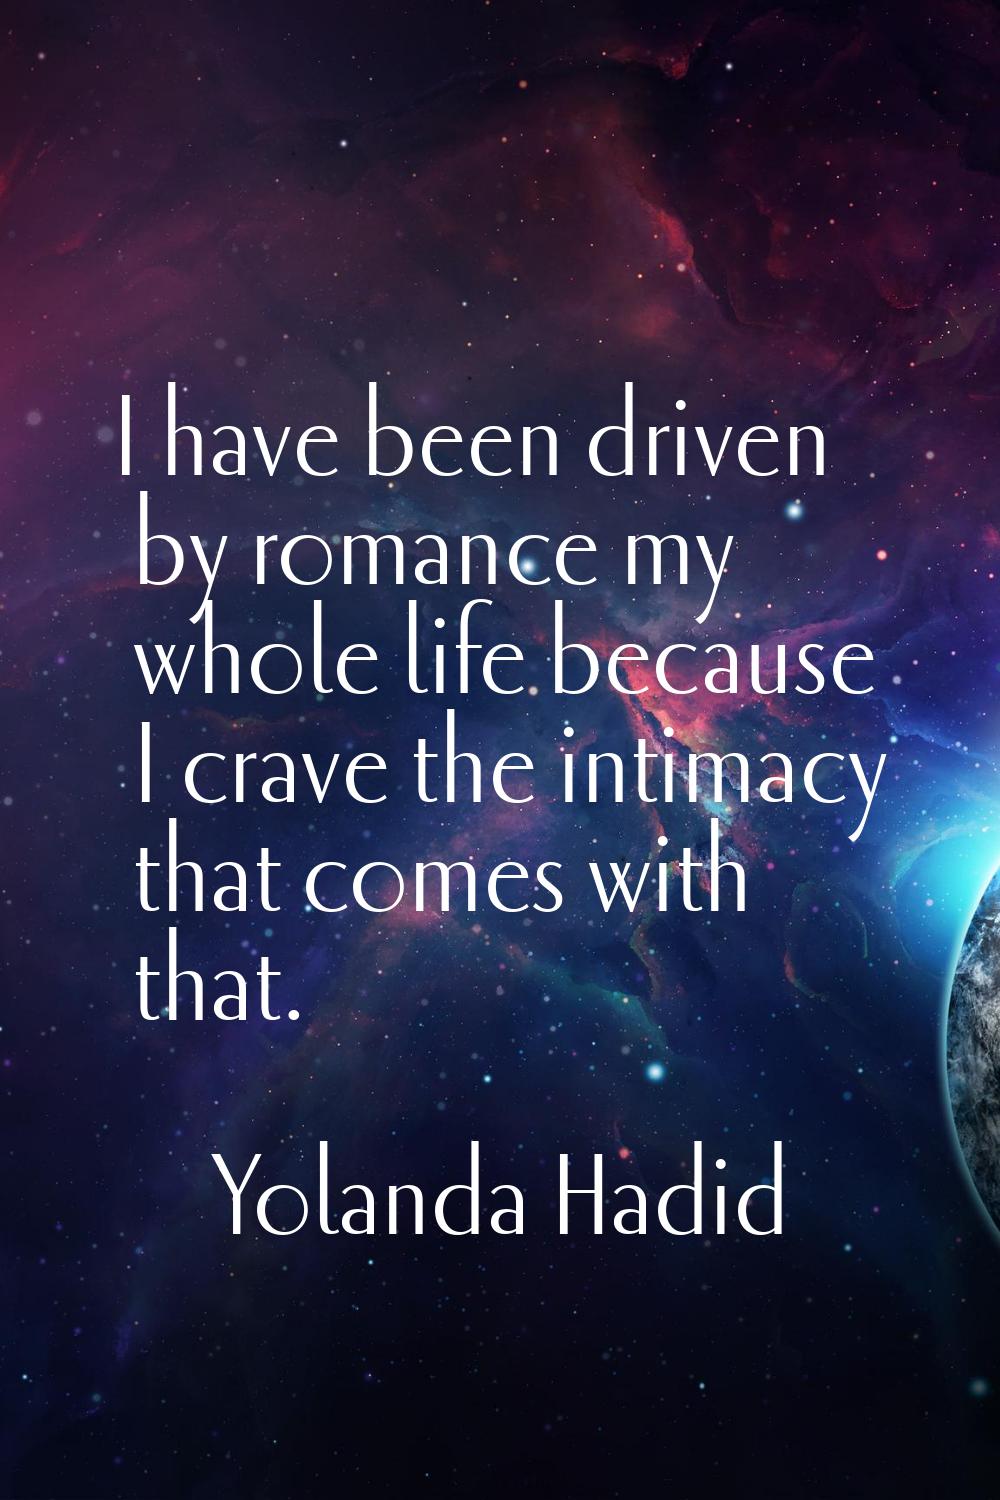 I have been driven by romance my whole life because I crave the intimacy that comes with that.